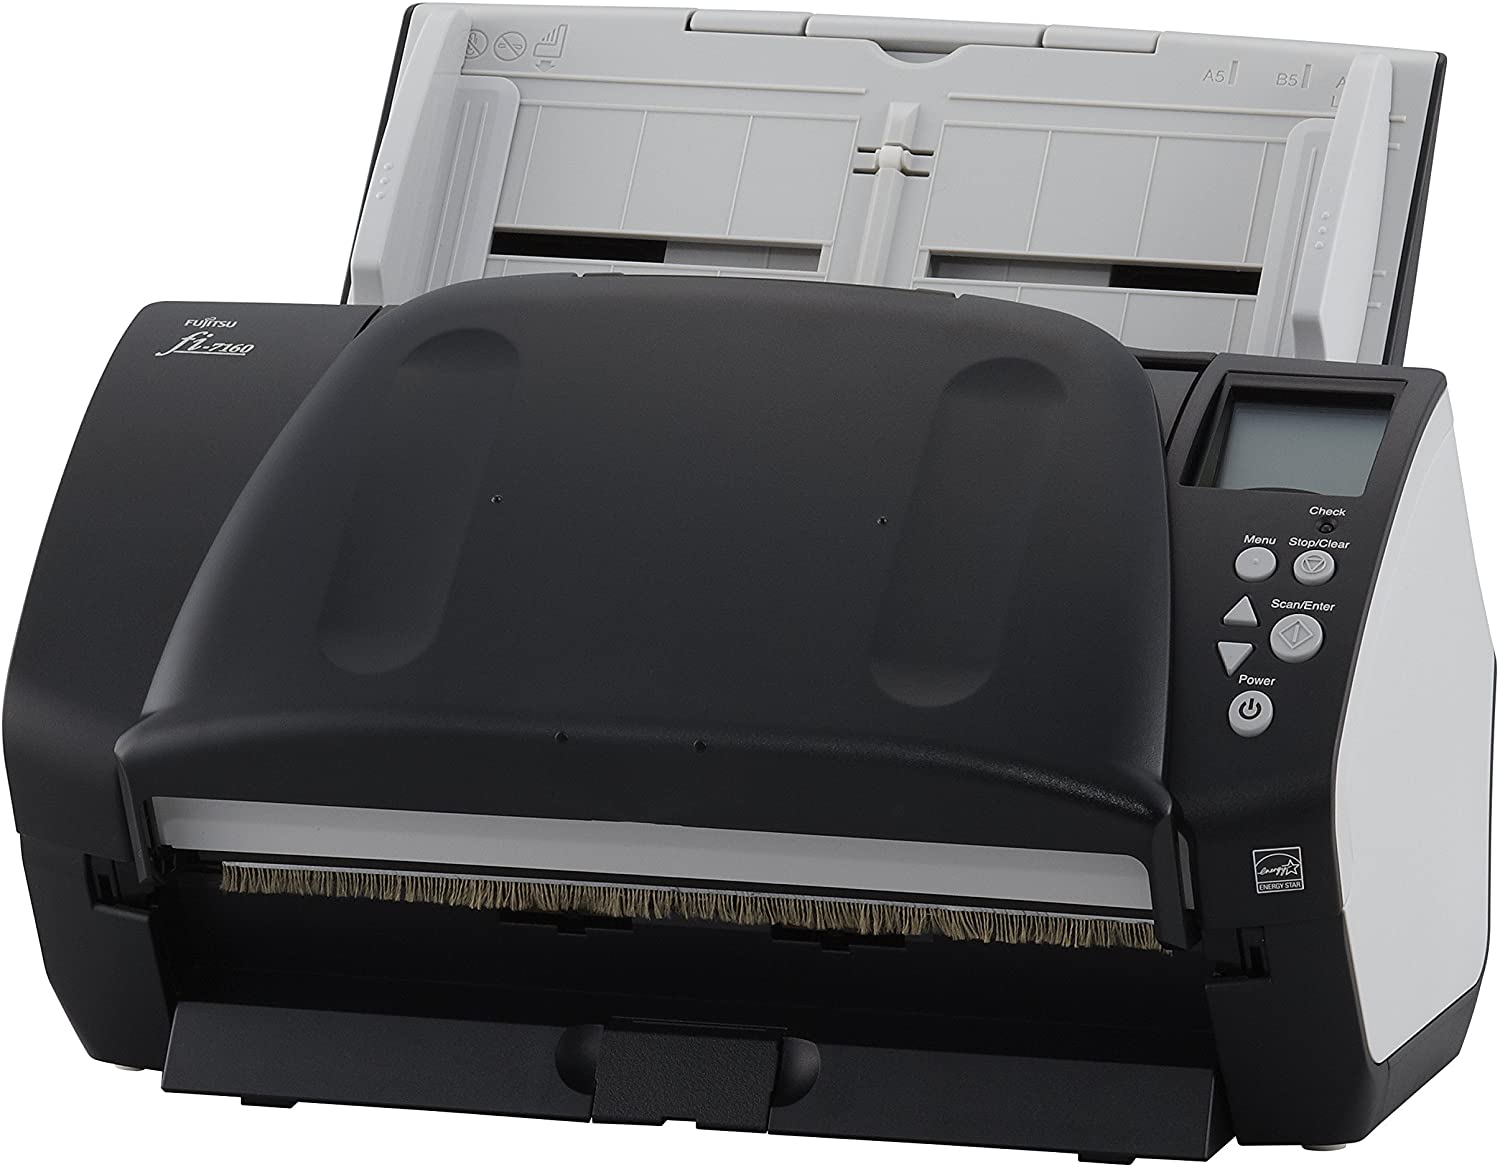 FUJITSU fi-7160 Image and document scanner Speed ​​60 /120 Pages per minute. The best and fastest document scanner